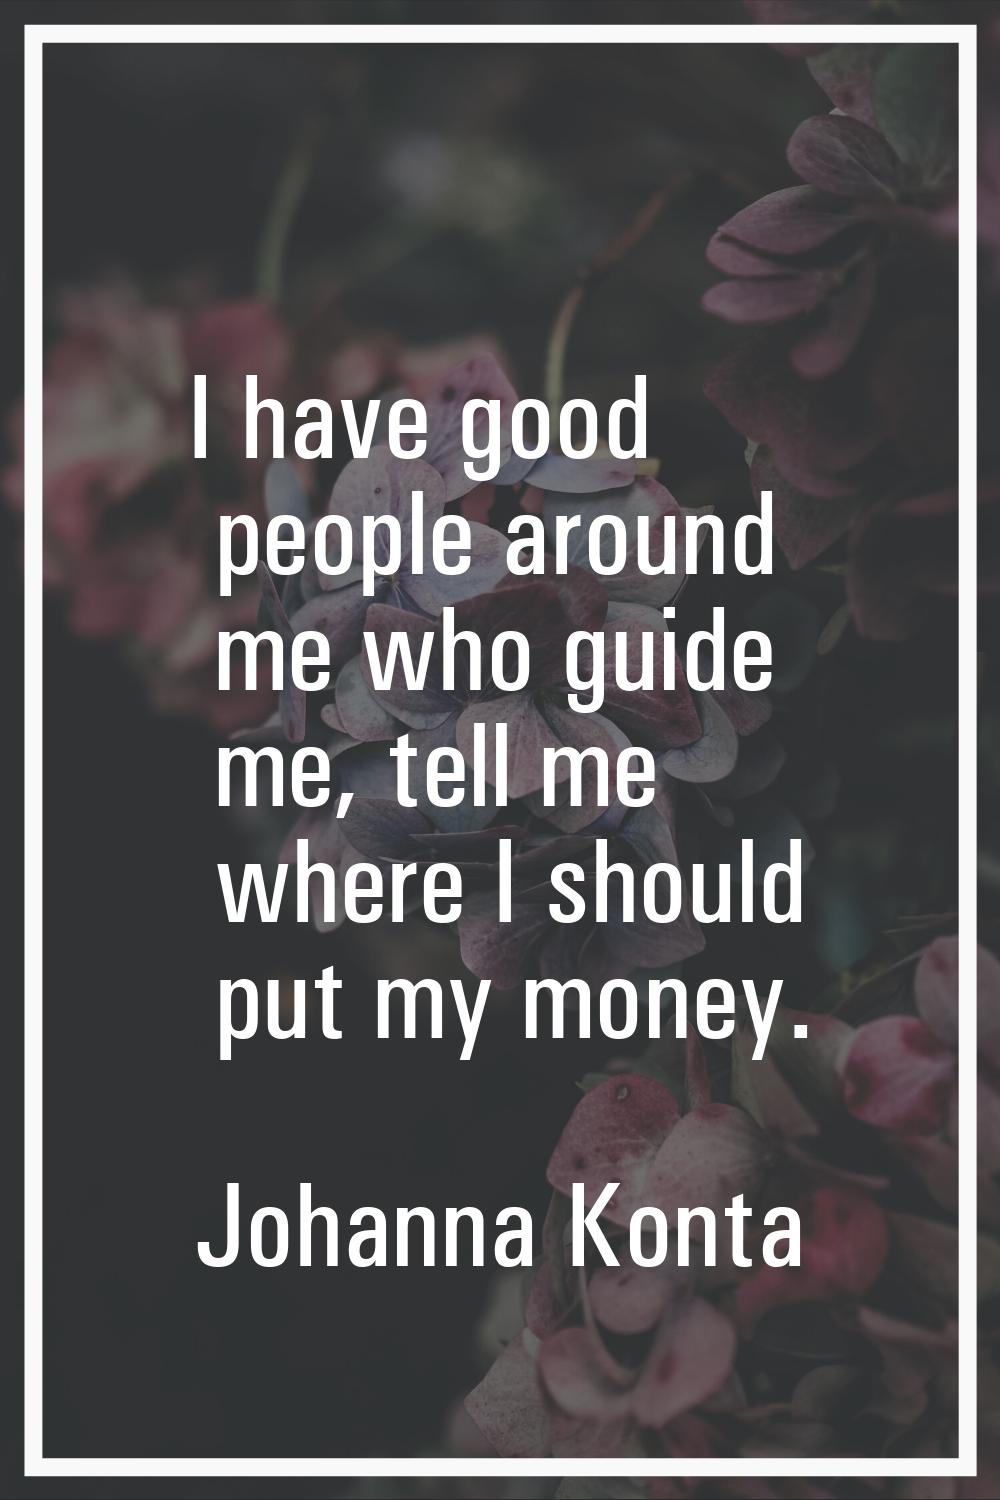 I have good people around me who guide me, tell me where I should put my money.